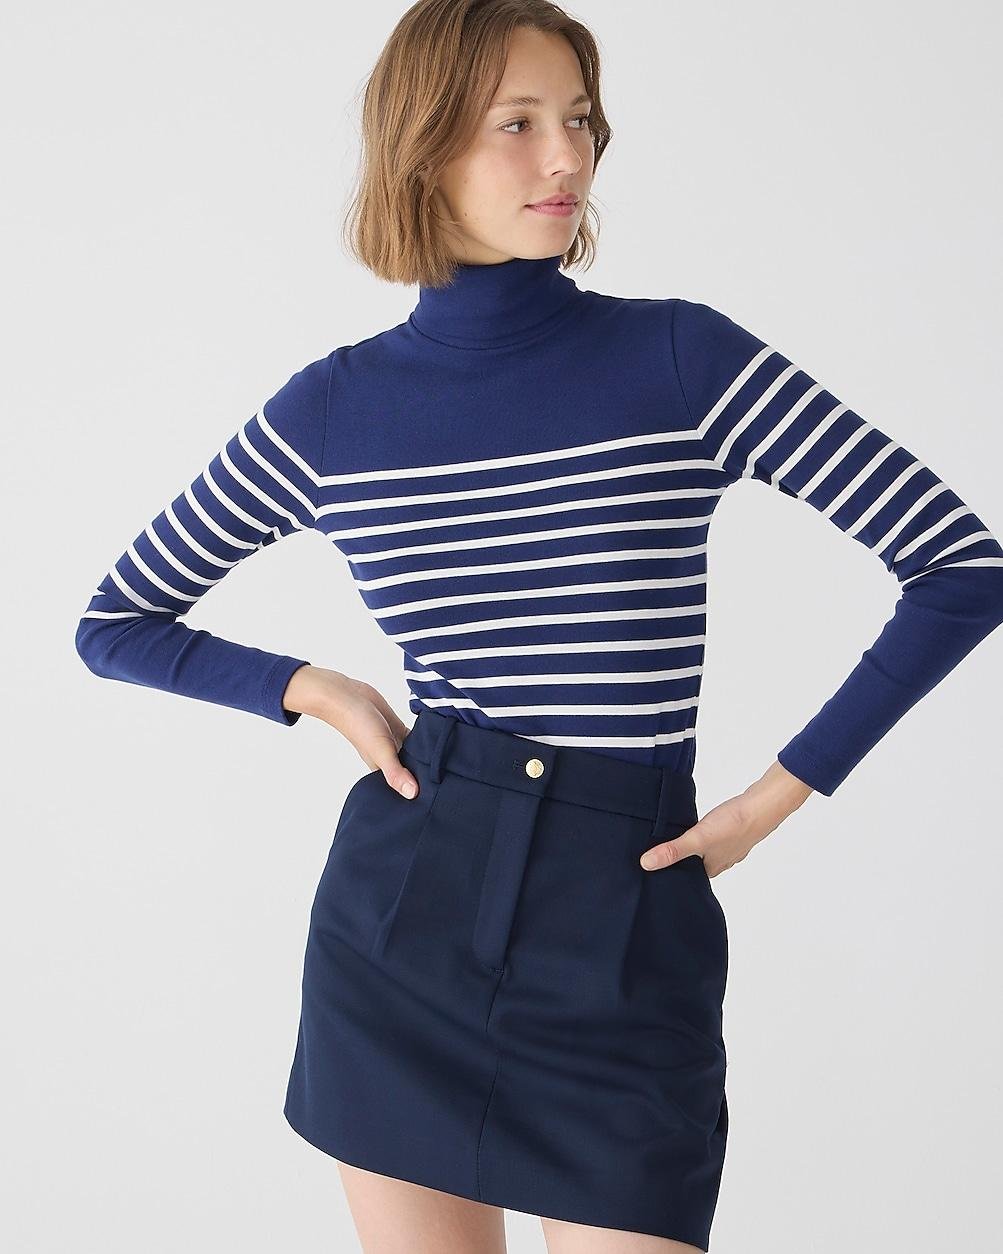 Perfect-fit turtleneck in stripe by J.CREW